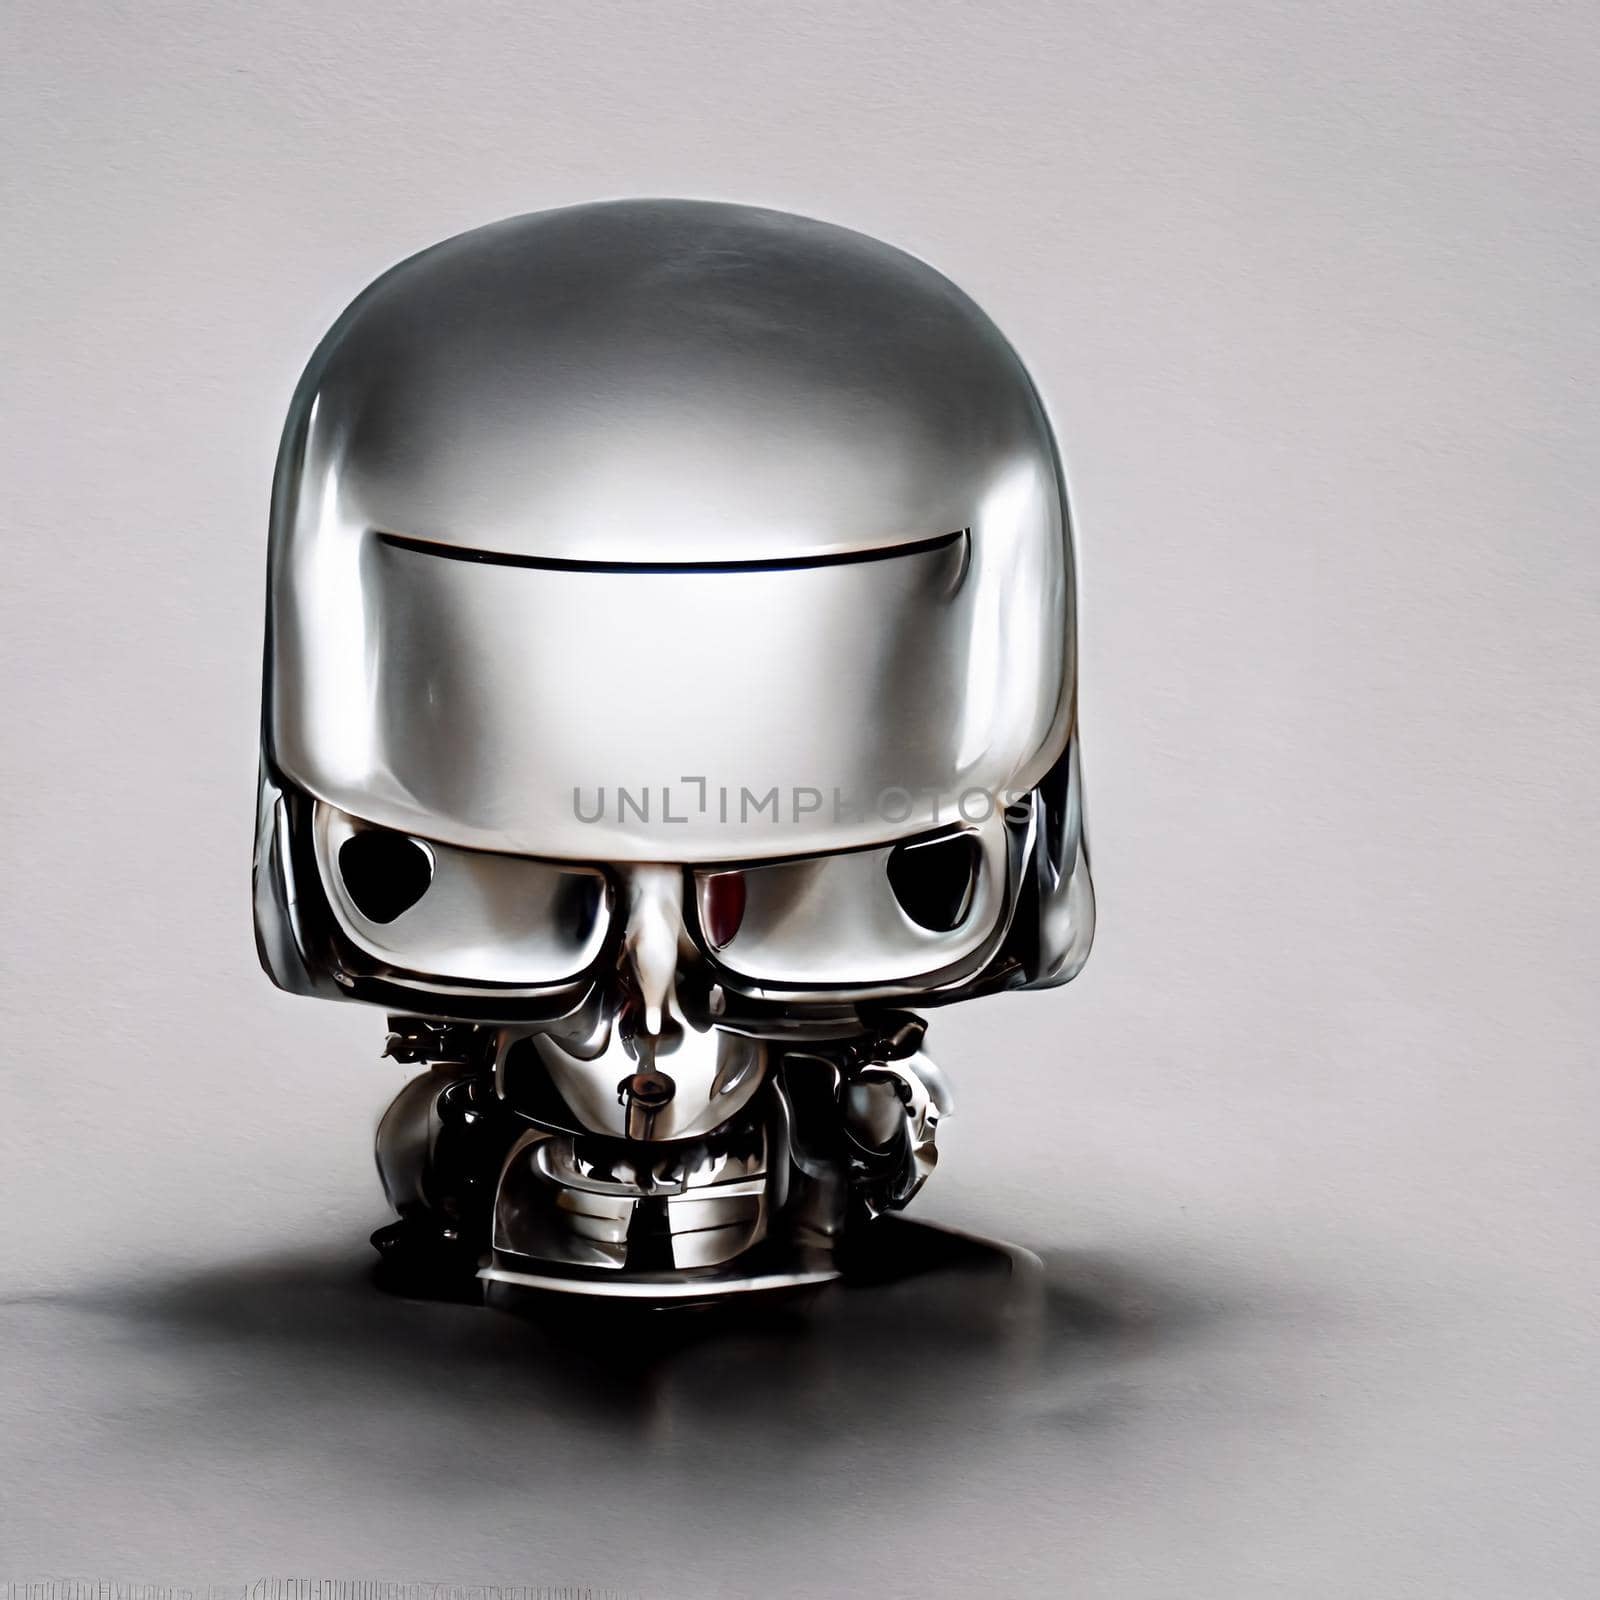 Chromed robot head looking at a the human